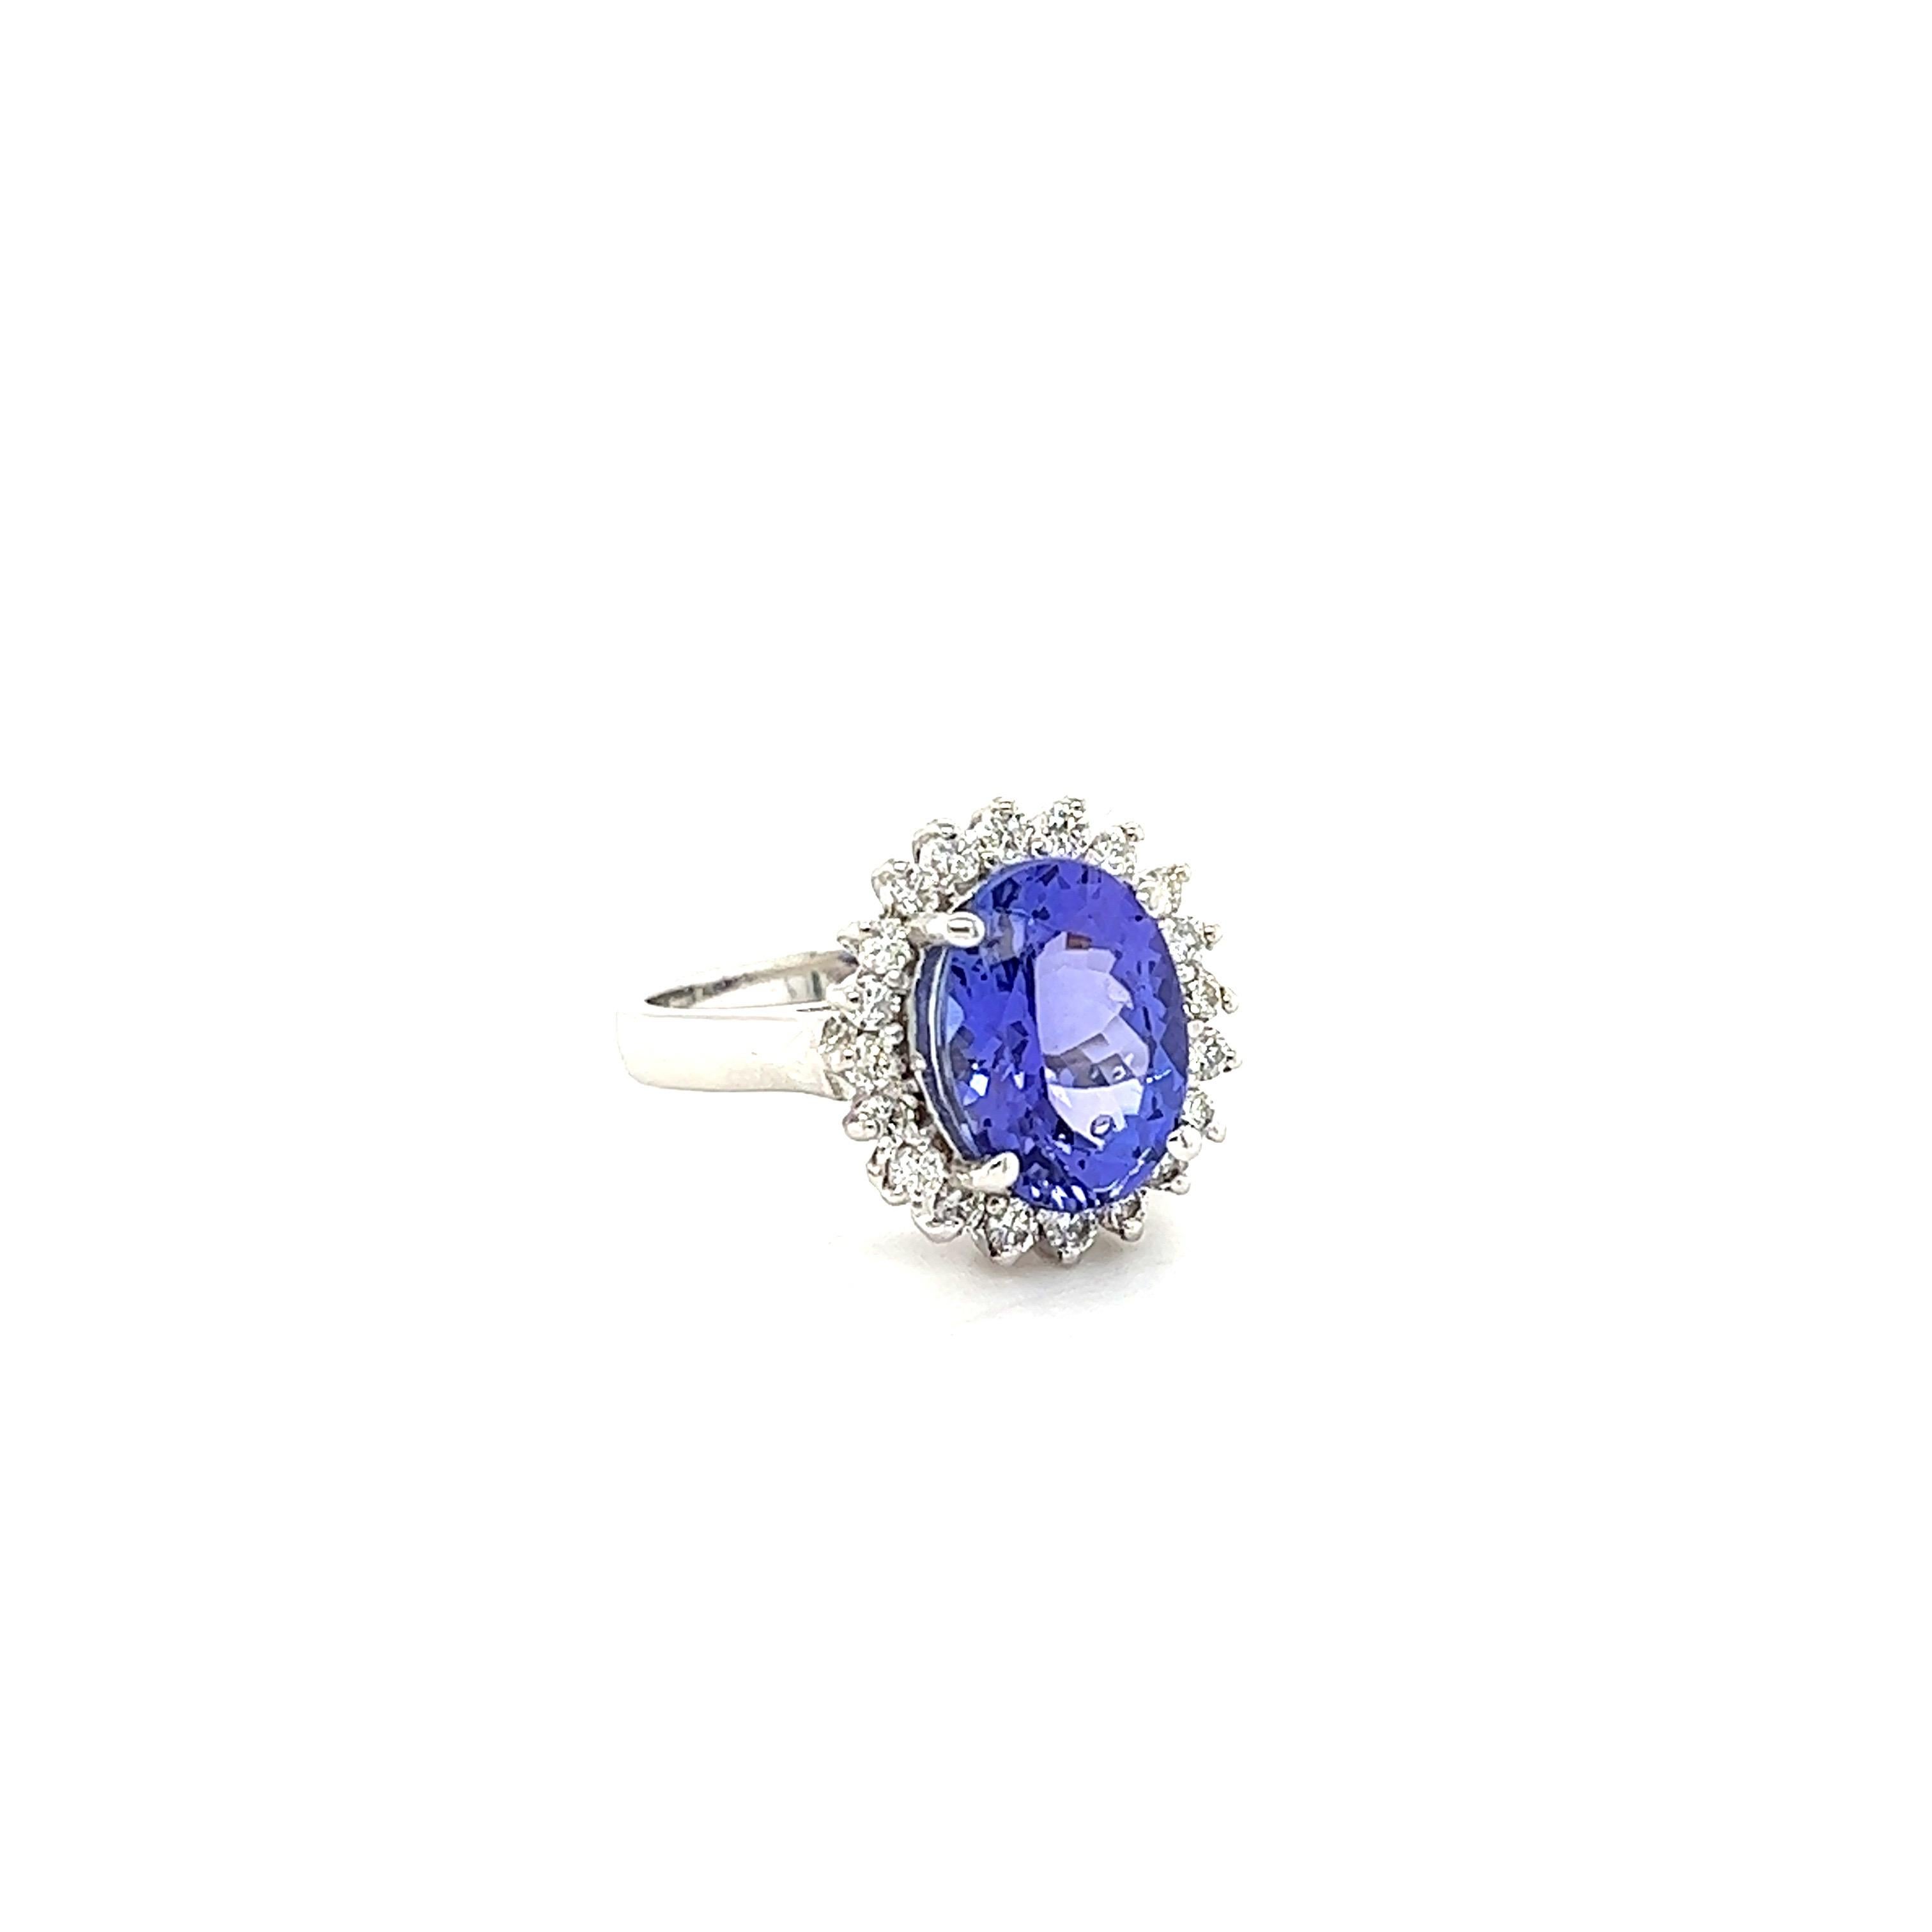 This ring has a radiant purple Oval Cut Natural Tanzanite weighing 4.50 Carats. The Tanzanite measures at 12 mm x 9 mm. It is surrounded by 20 Round Cut Diamonds that weigh 0.52 Carats. The clarity and color of the diamonds are SI/F. The total carat